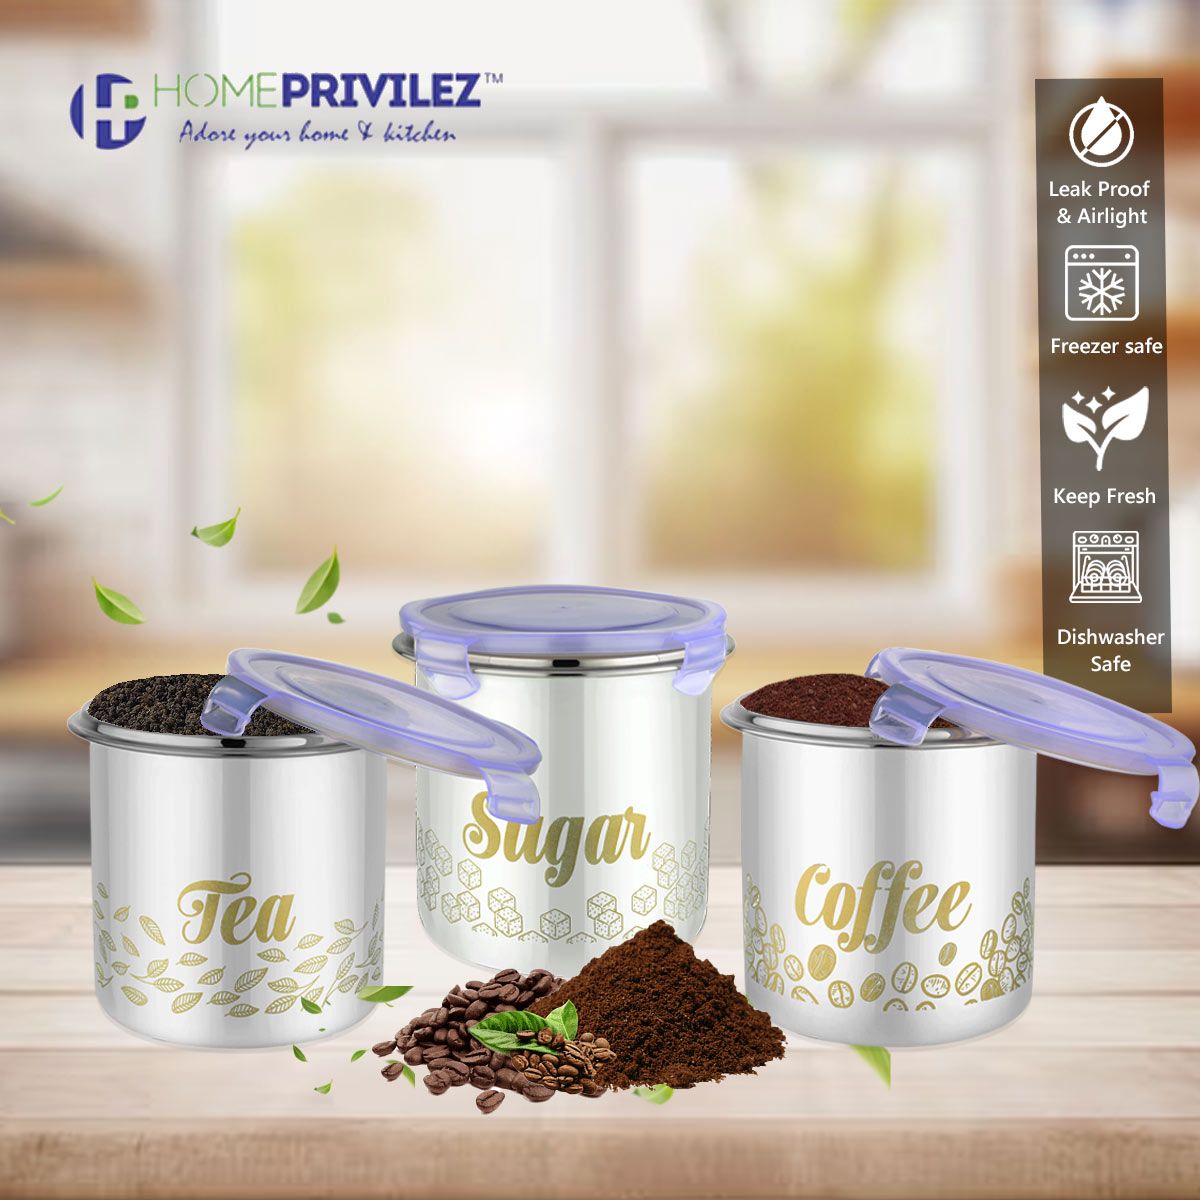 “Flip & Seal “Stainless Steel Air Tight Storage Container- Tea, Coffee & Sugar Set of 3 in white colour(1000mLx3)